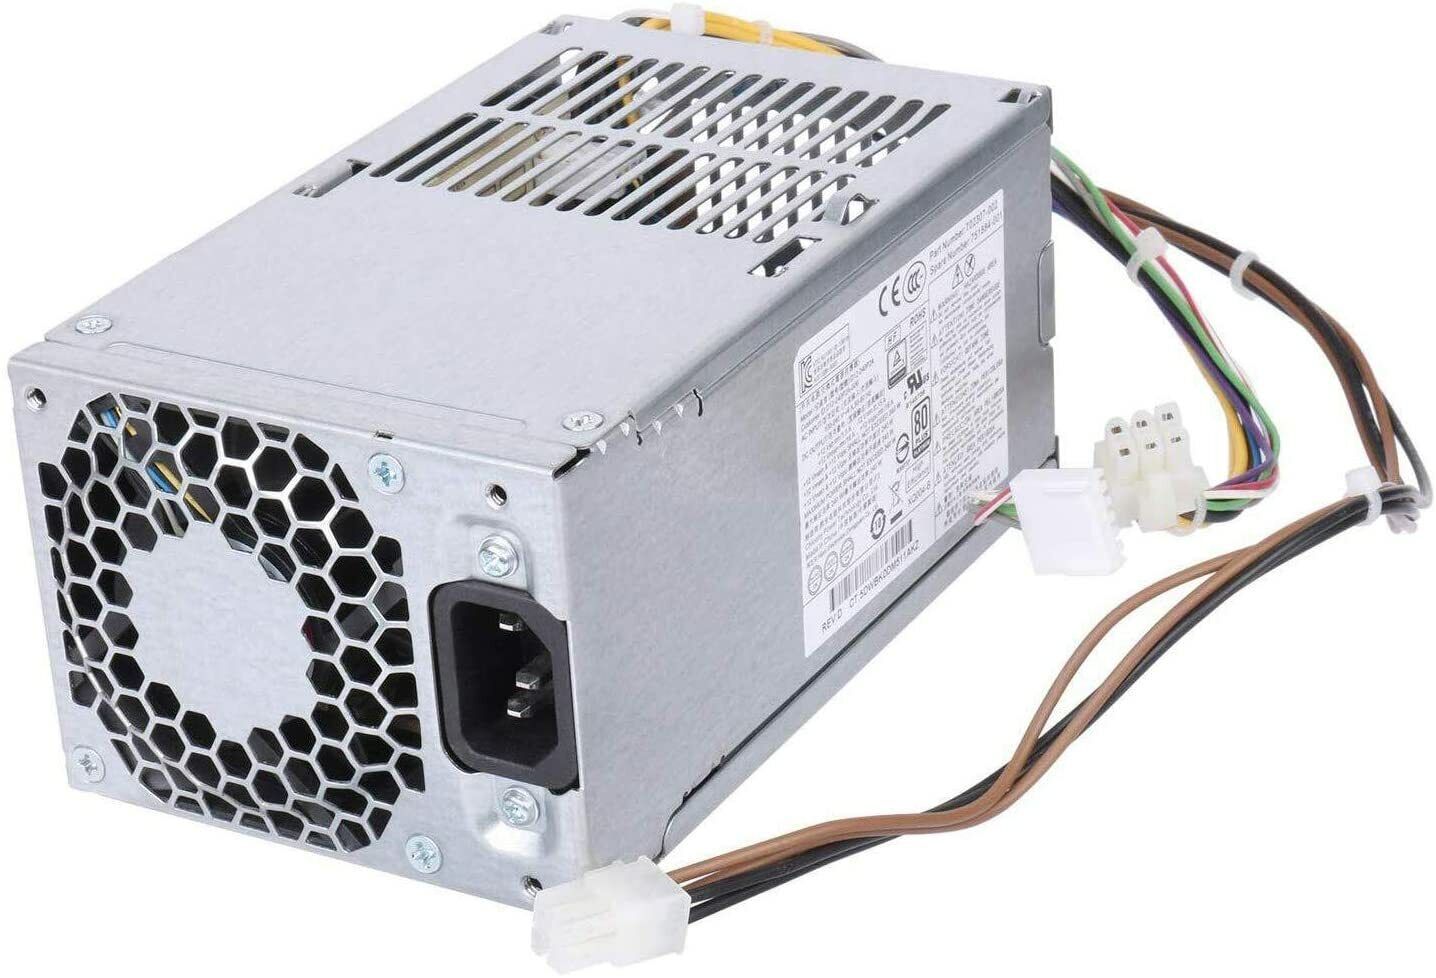 New 240W Power Supply Replace for HP ProDesk 400 600 800 G1 G2 Series 751886-001